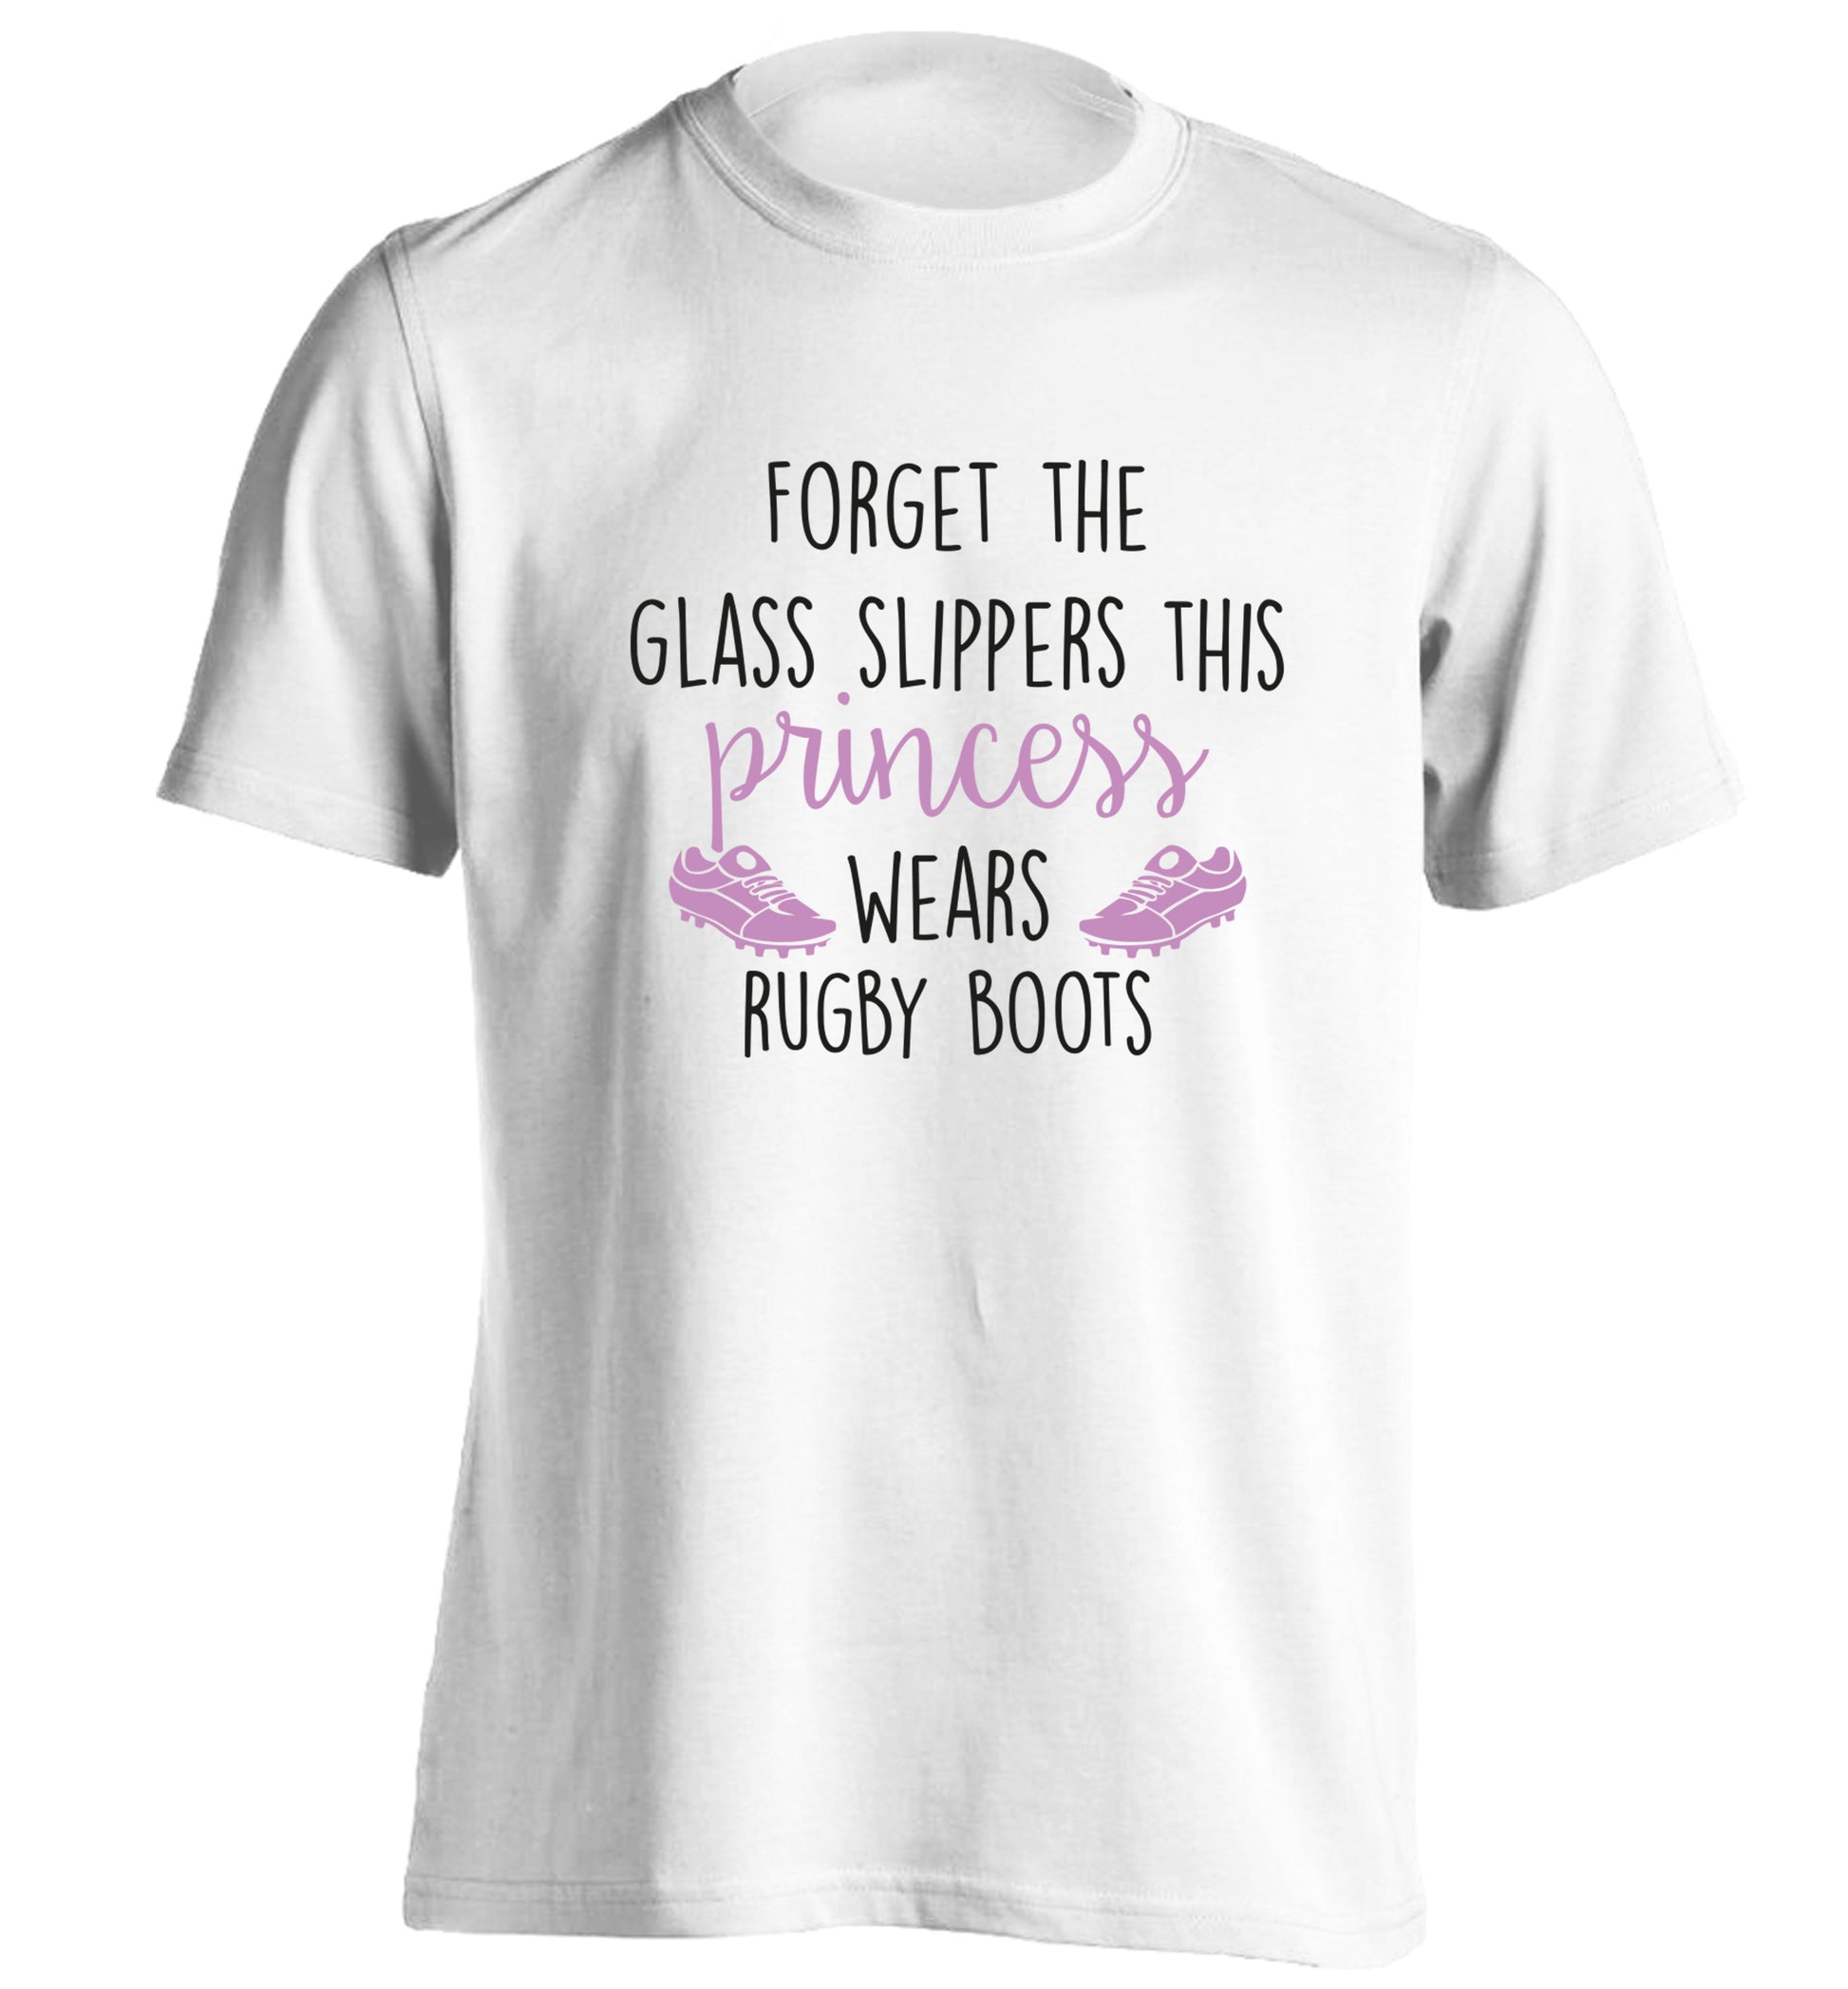 Forget the glass slippers this princess wears rugby boots adults unisex white Tshirt 2XL